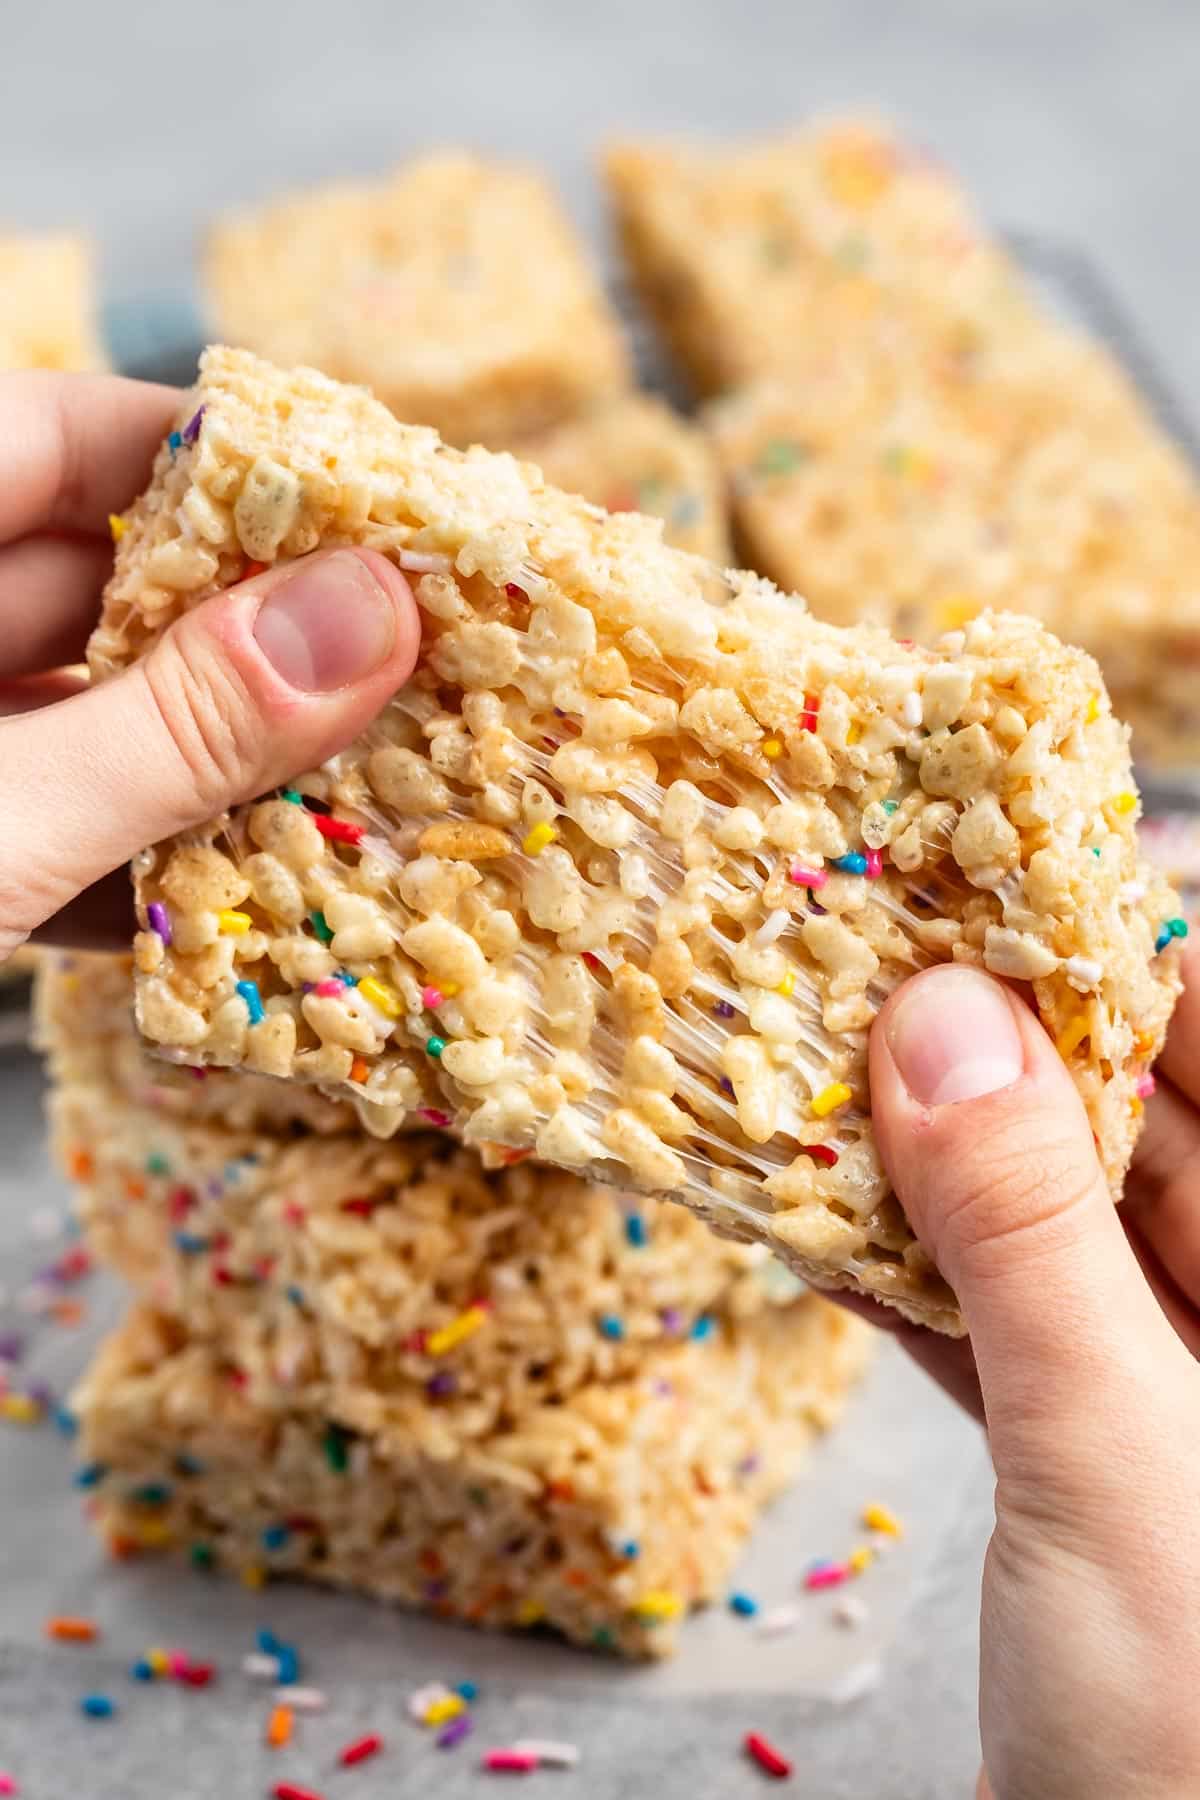 hand holding Rice Krispie treats with sprinkles baked in.